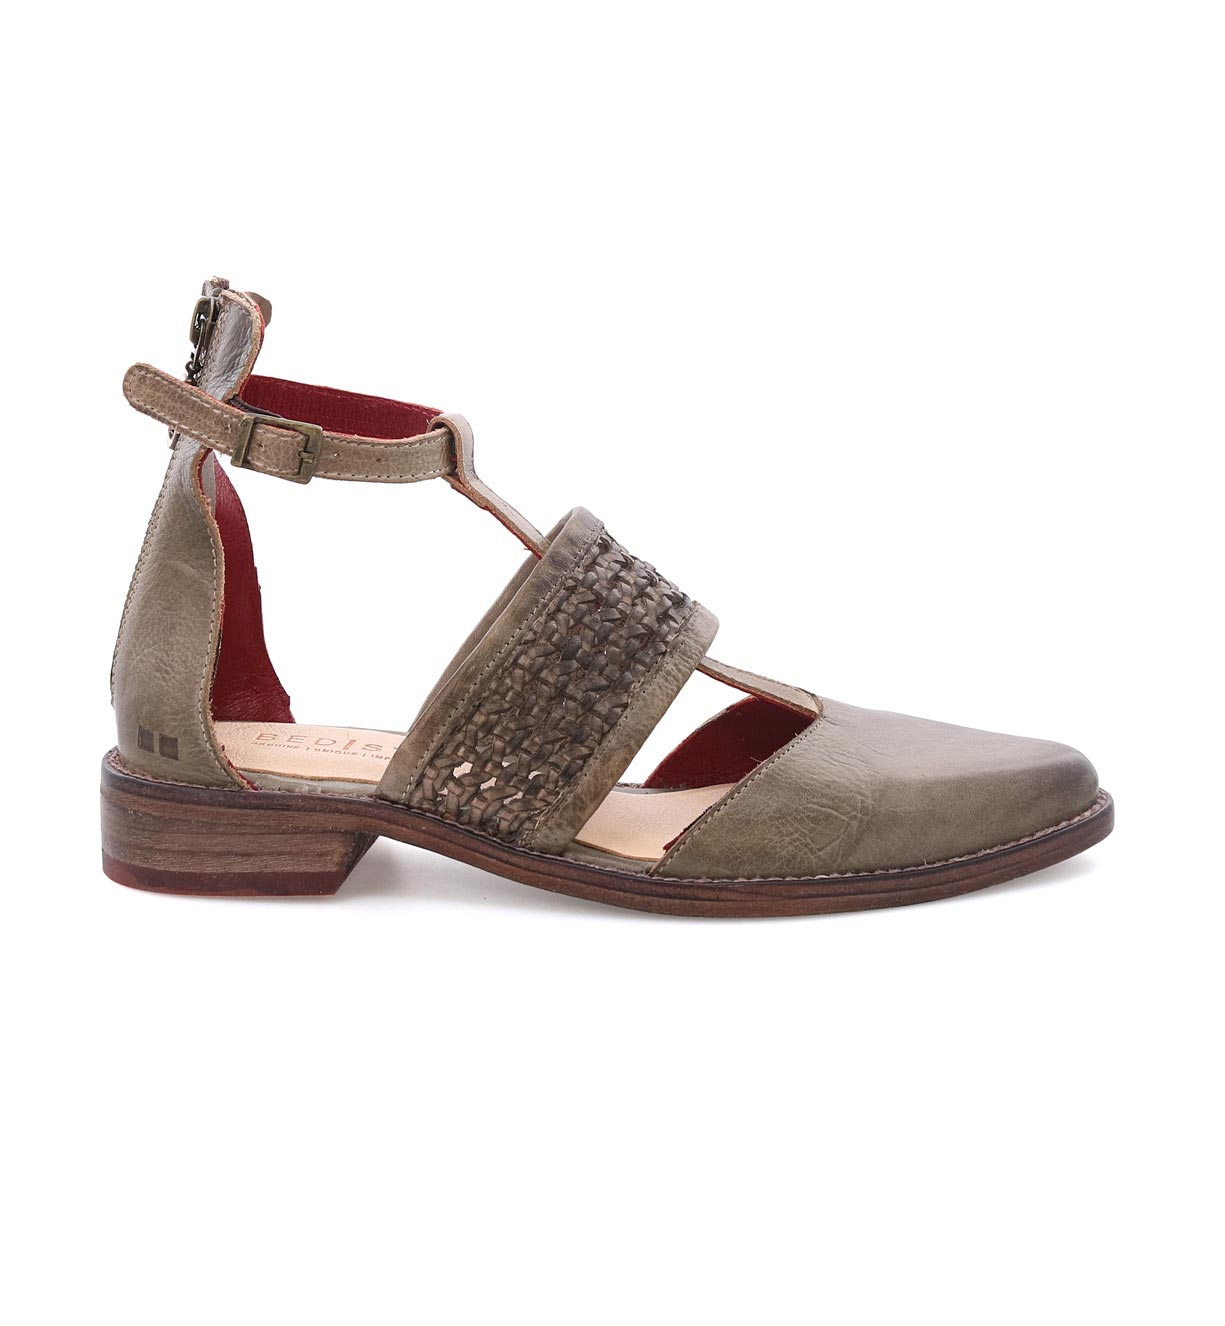 A pair of women's Bed Stu sandals with braided straps named Bethany II.